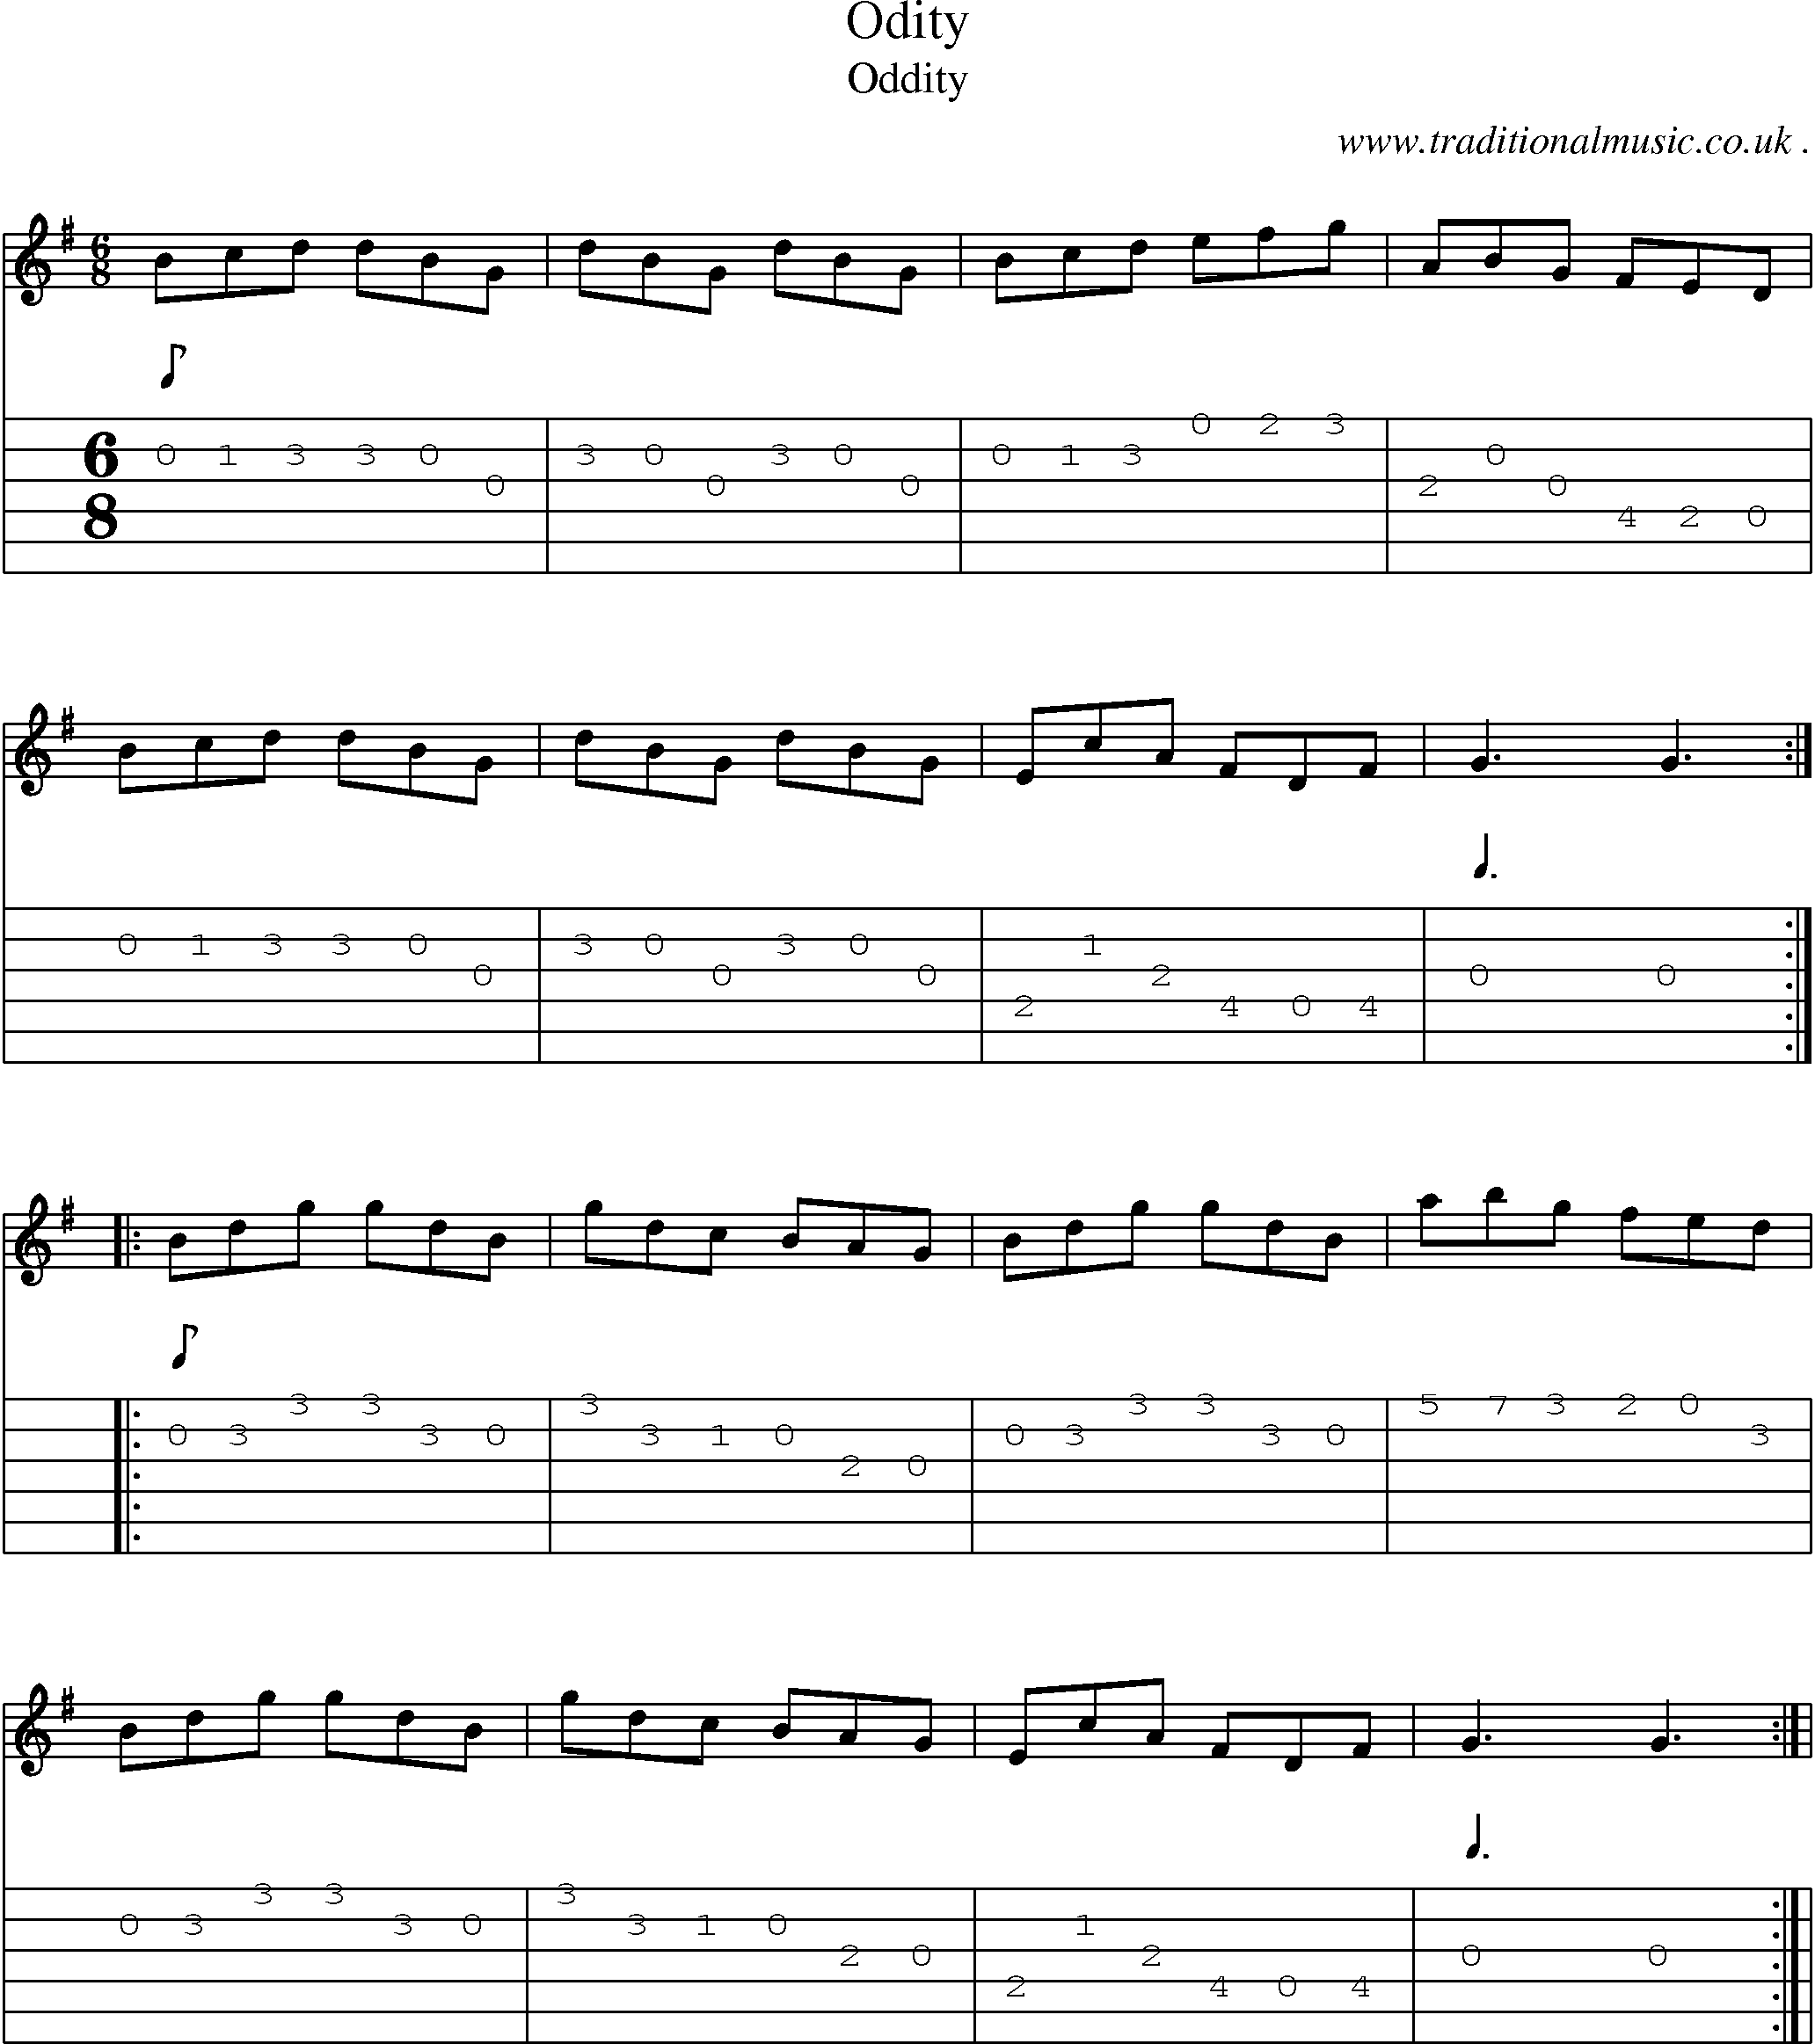 Sheet-Music and Guitar Tabs for Odity